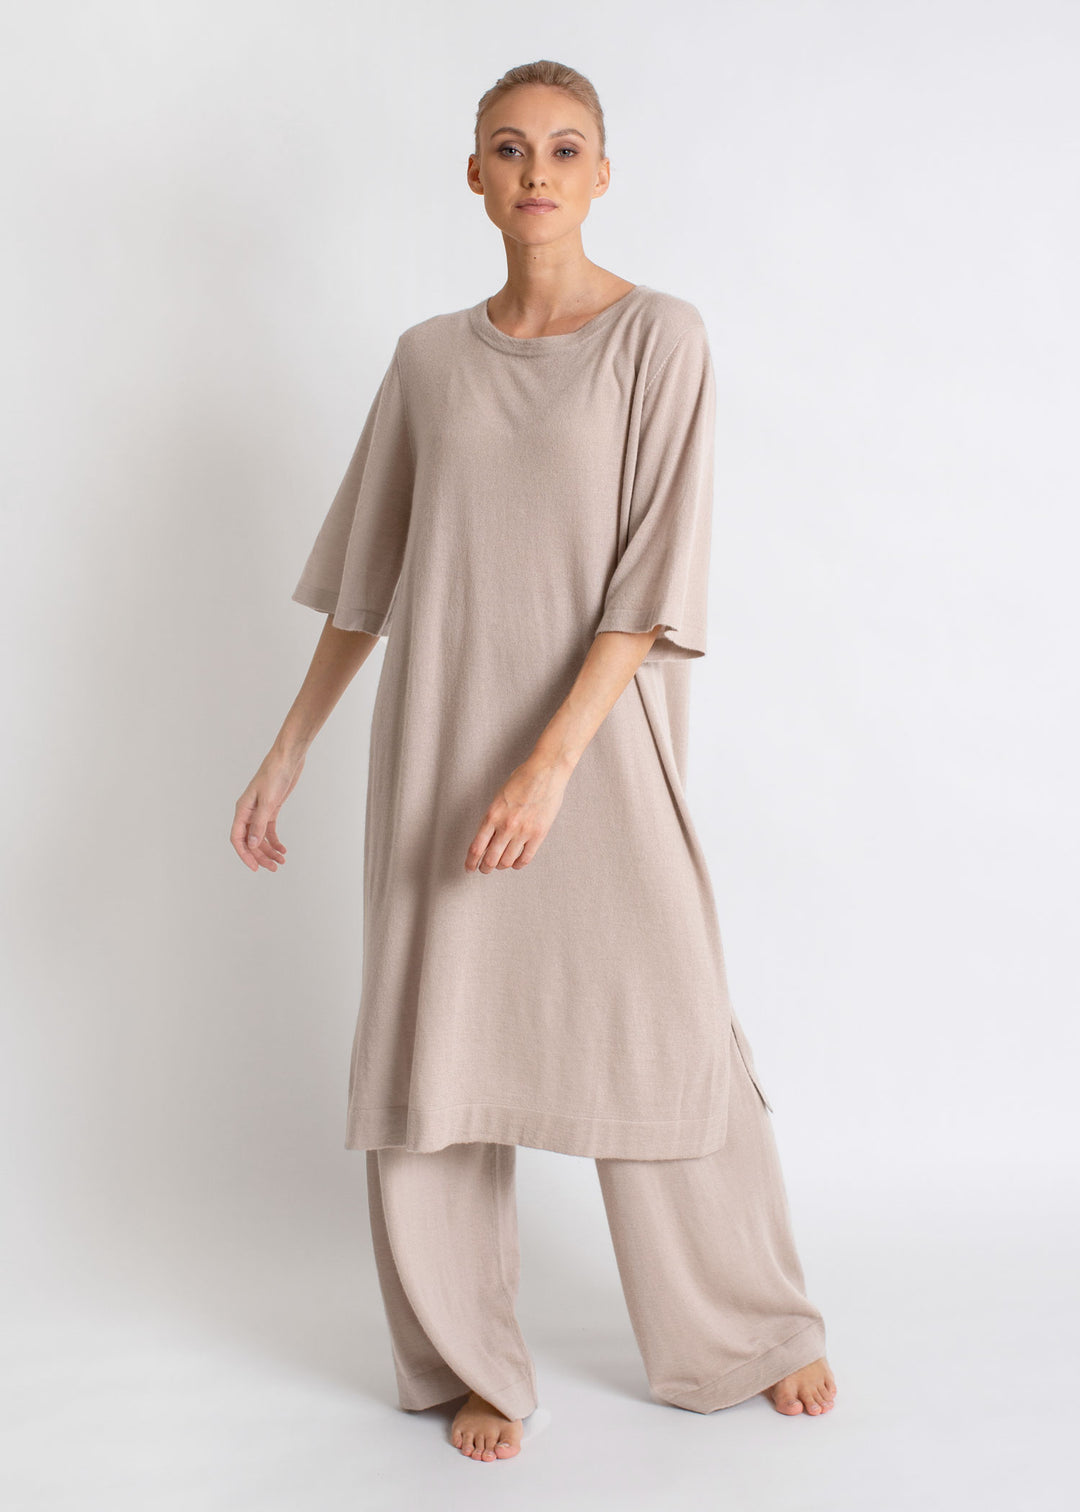 Air Tunic in 100% pure cashmere. Scandinavian design by Kashmina. Color: feather